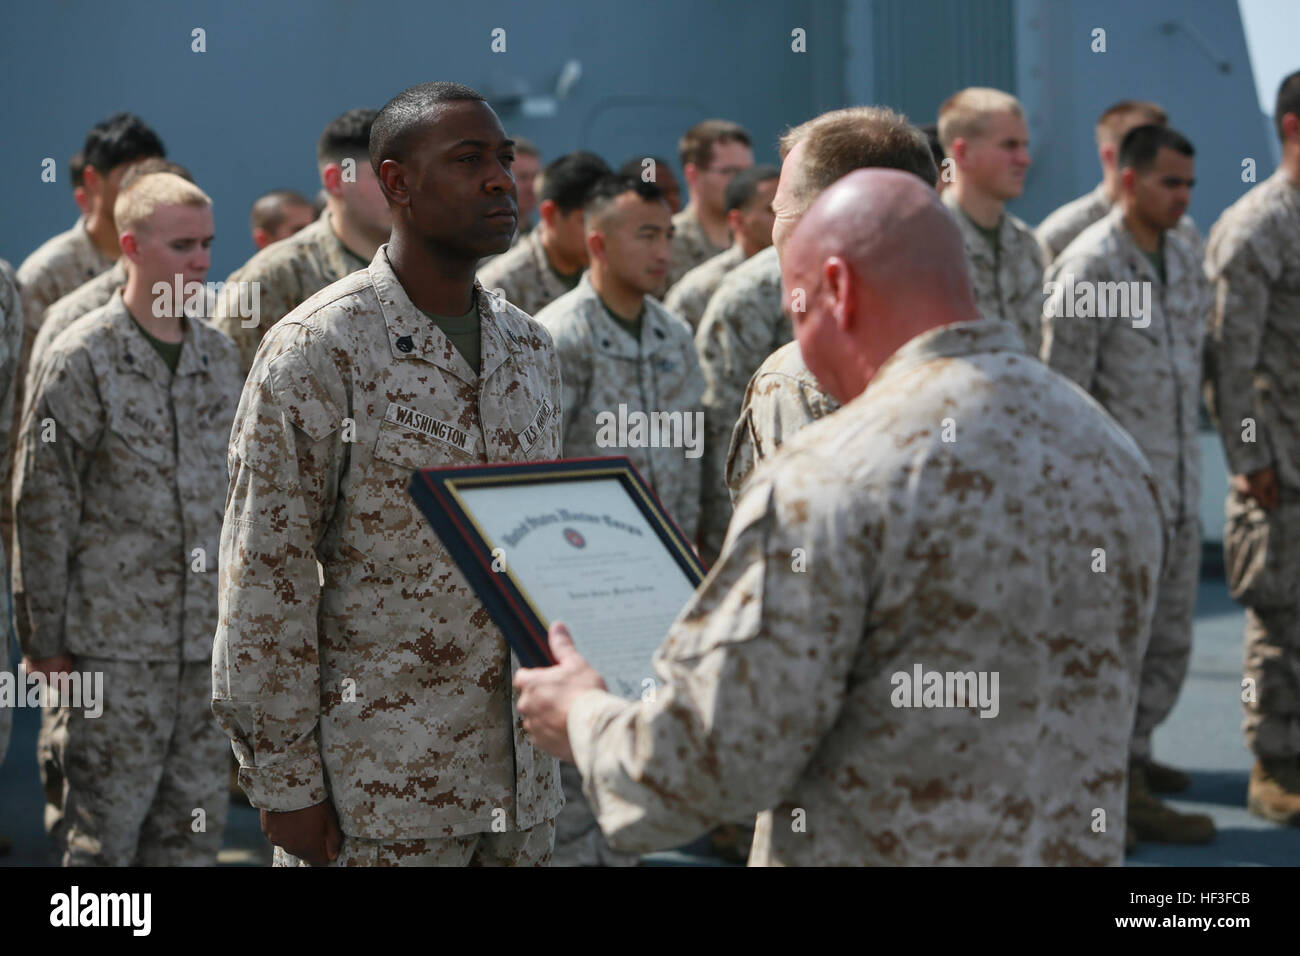 GULF OF ADEN (July 1, 2015) U.S. Marine Gunnery Sgt. Michael Washington, left, reports to Lt. Col. Edward C. Greeley during his promotion ceremony on the forecastle of the amphibious transport dock ship USS Anchorage (LPD 23). Washington is the company gunnery sergeant for Headquarters and Service Company, Battalion Landing Team 3rd Battalion, 1st Marine Regiment, 15th Marine Expeditionary Unit. Anchorage is part of the Essex Amphibious Ready Group and, with the embarked 15th Marine Expeditionary Unit, is deployed in support of maritime security operations and theater security cooperation effo Stock Photo